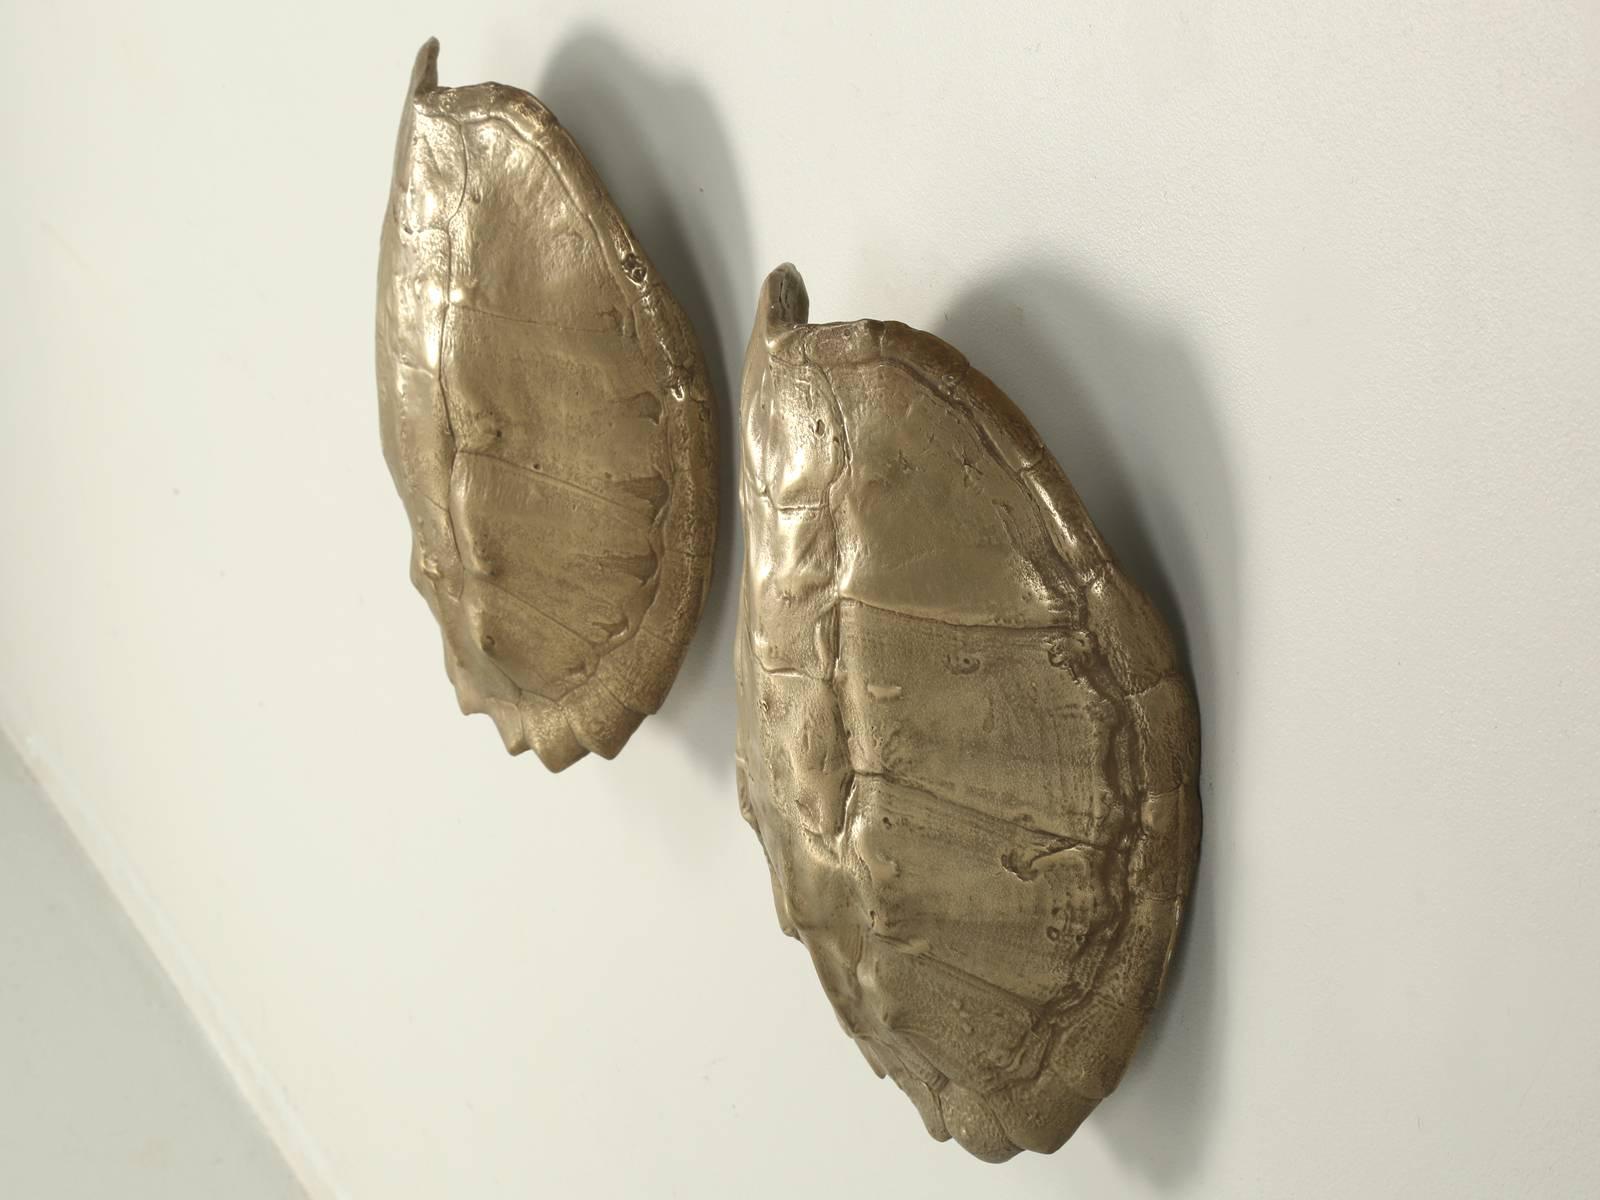 Pair of Vintage Bronzed Turtle Shell Sconces, originally purchased in the 1970s and we quickly realized, that you could not merely polish the Turtle Shells to reveal, what one would typically expect a Turtle Shell to look like. They were ugly and